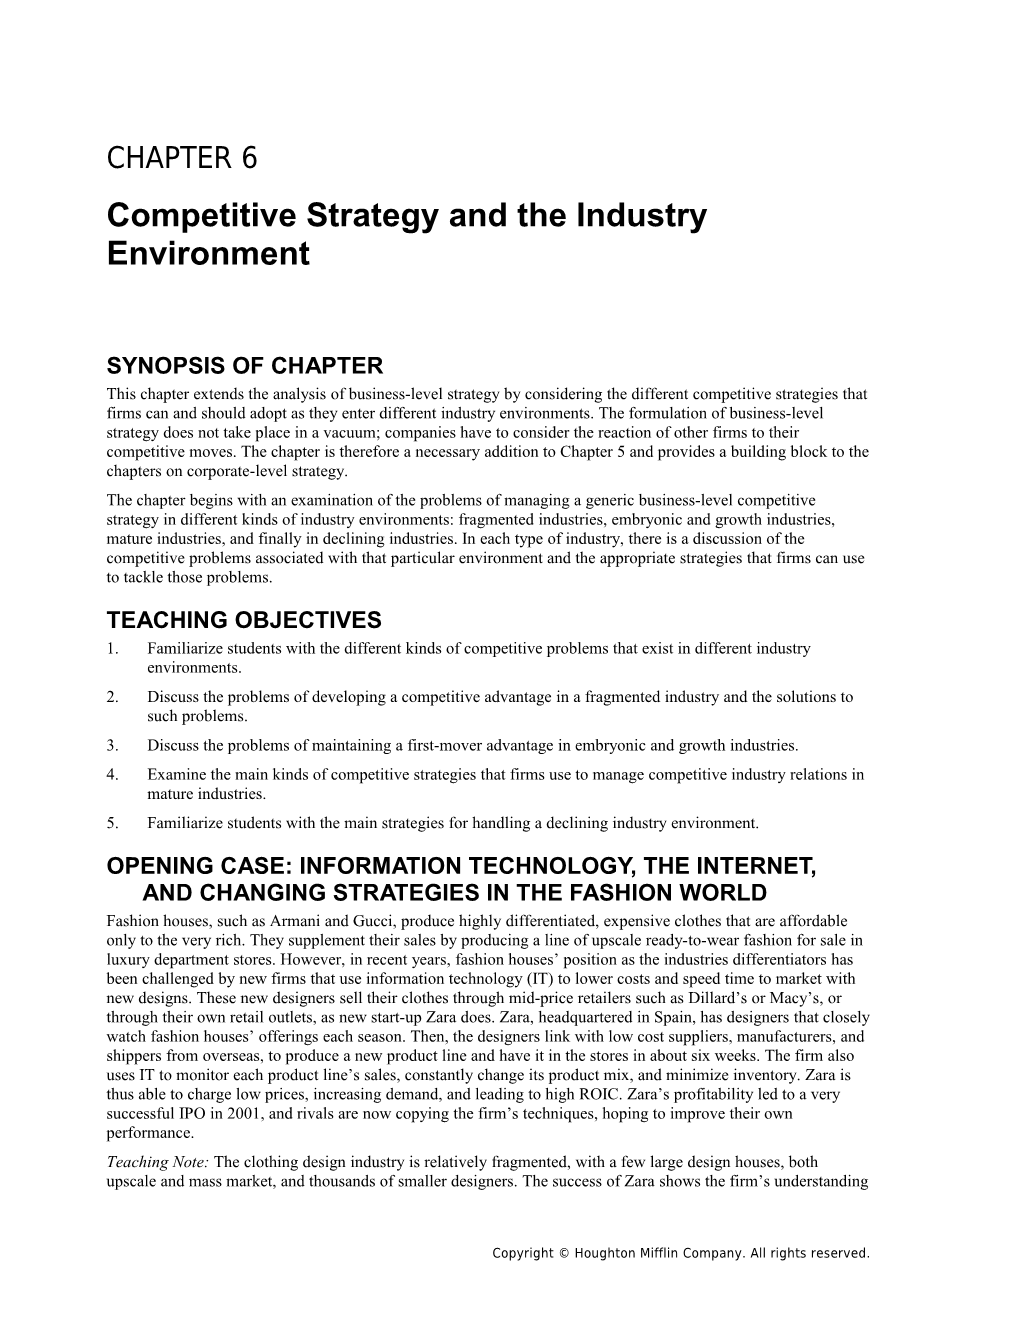 Chapter 6: Competitive Strategy and the Industry Environment 1